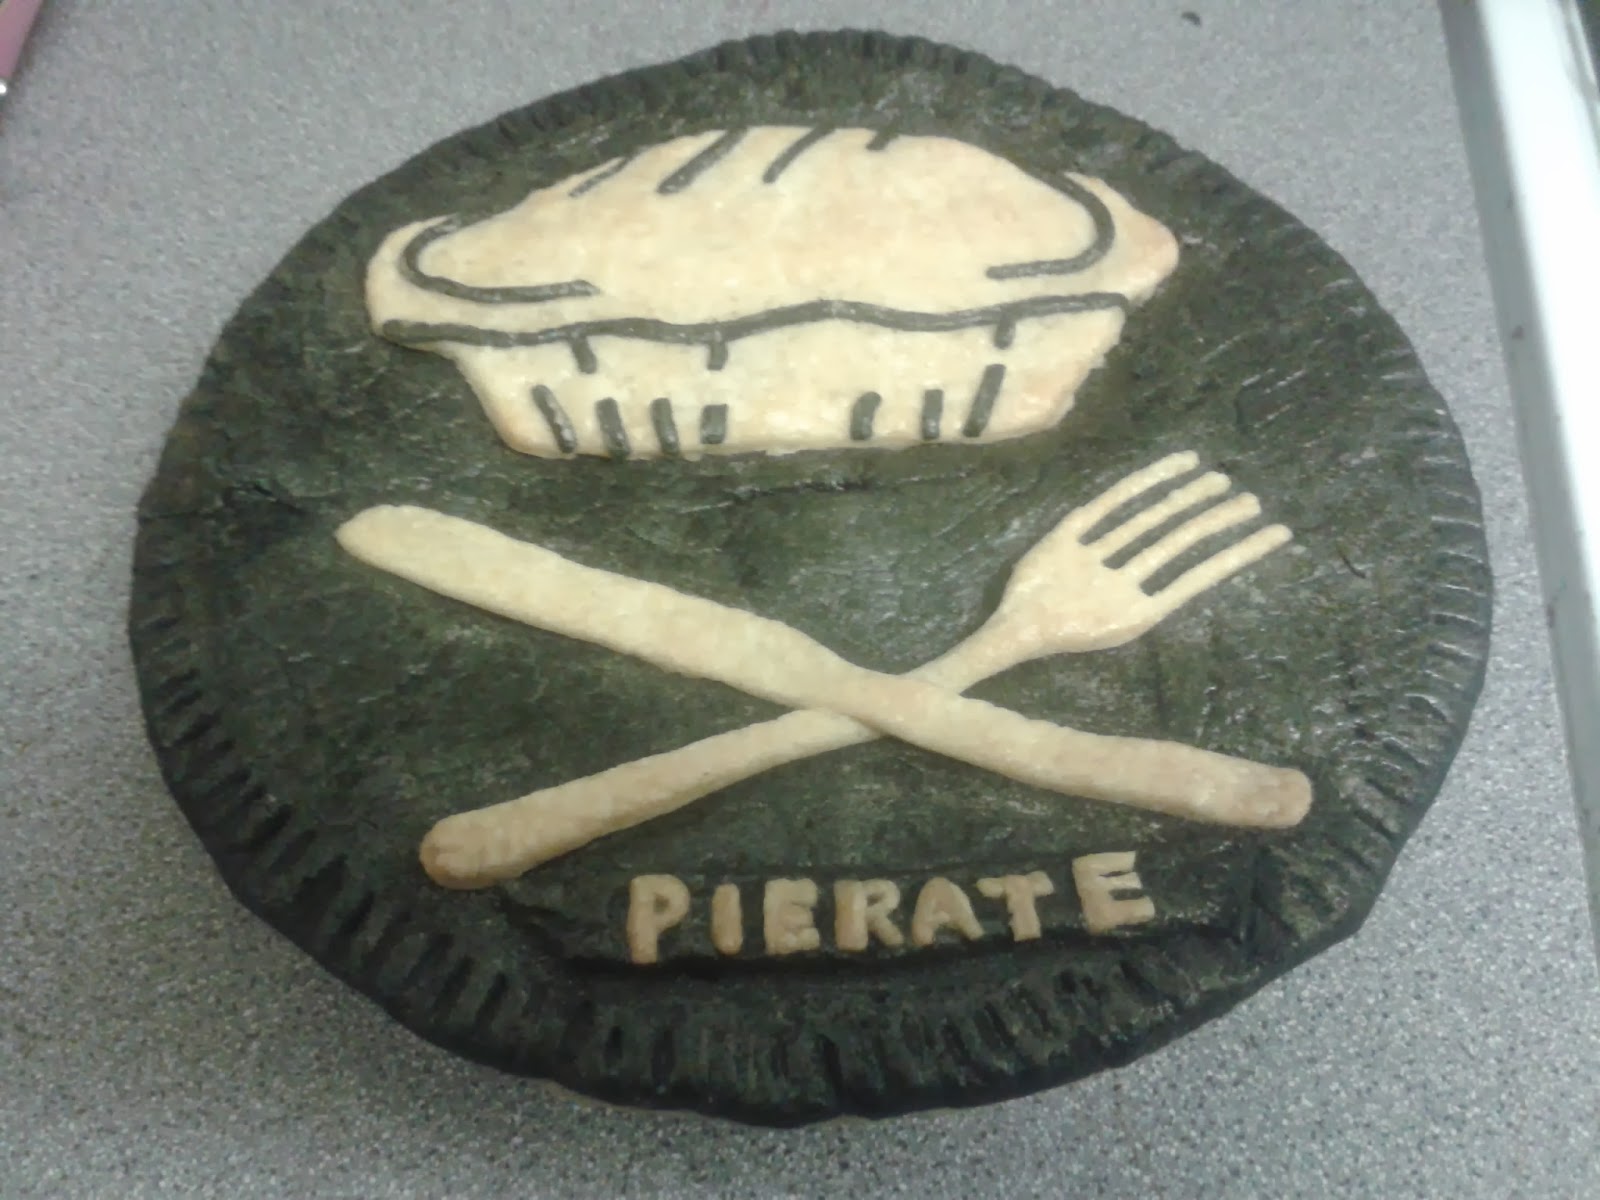 The Pierate Logo Pie Review